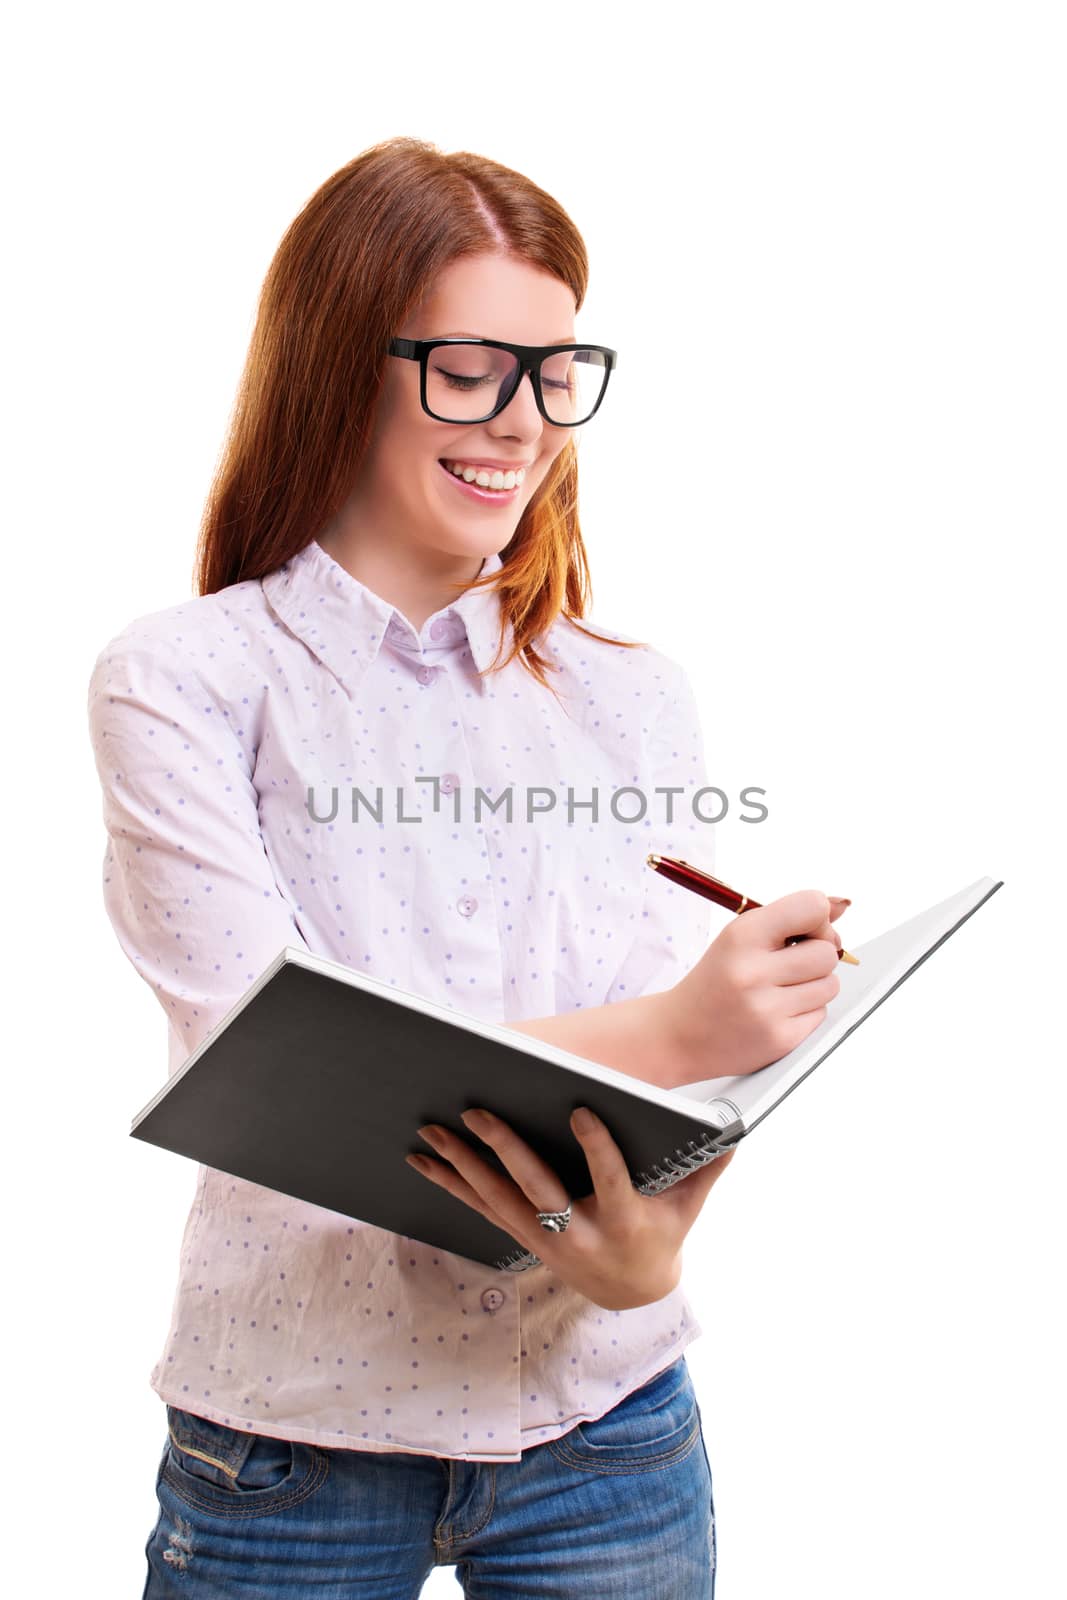 beautiful smiling young woman holding a notebook and taking notes, isolated on white background